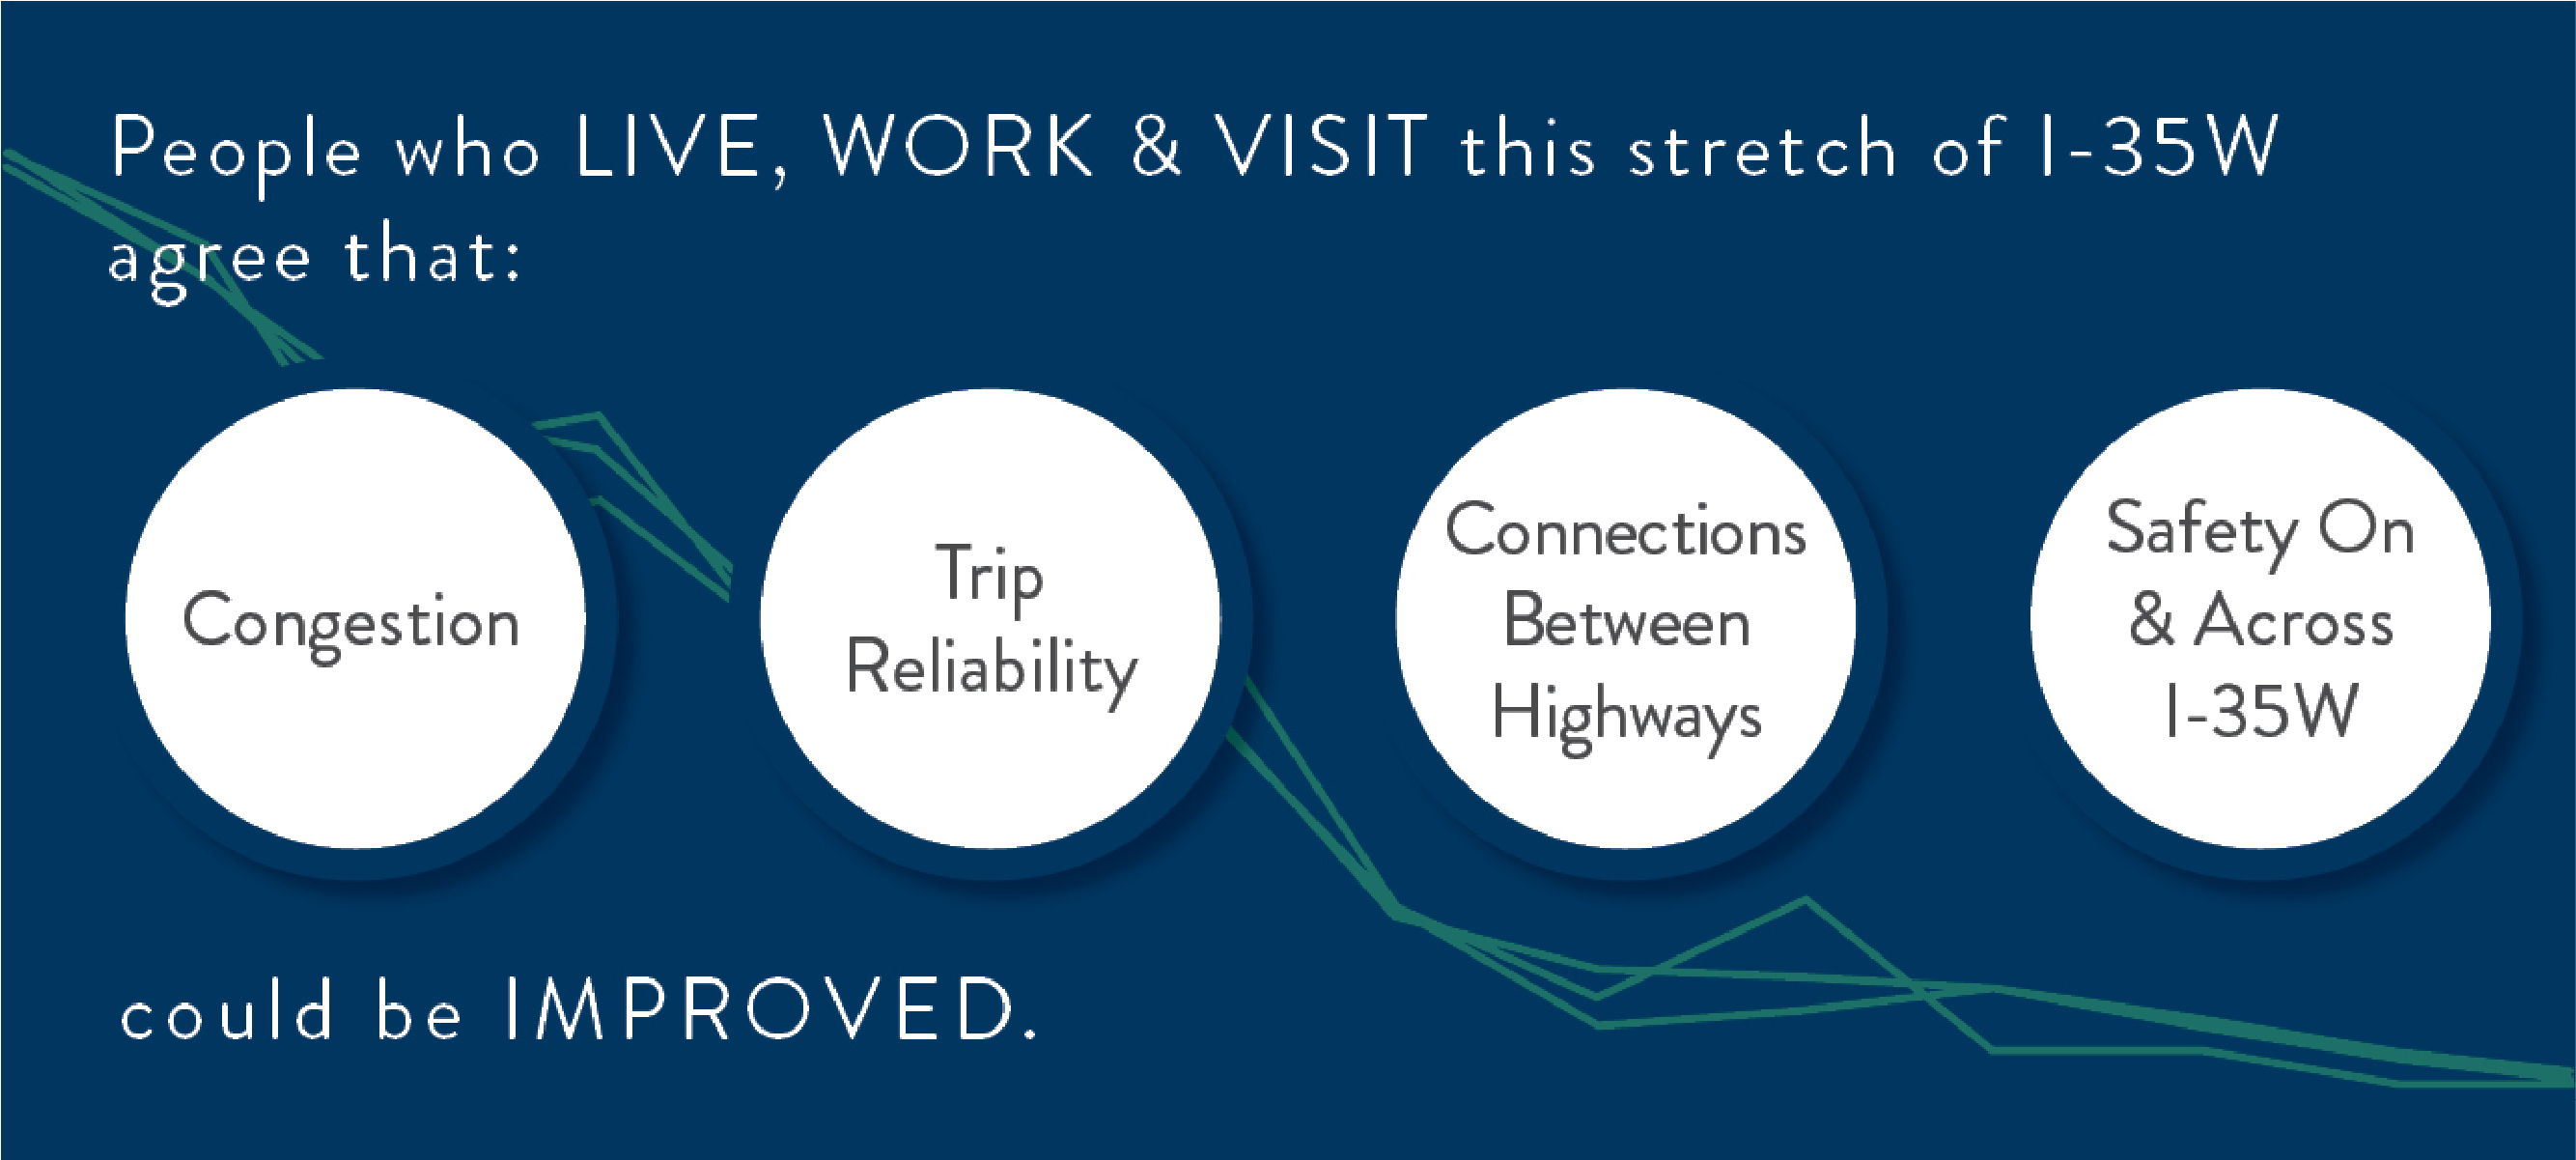 People who live, work and visit this stretch of I-35W agree that congestion, trip reliability, connections between highways, and safety on and across I-35W could be improved.